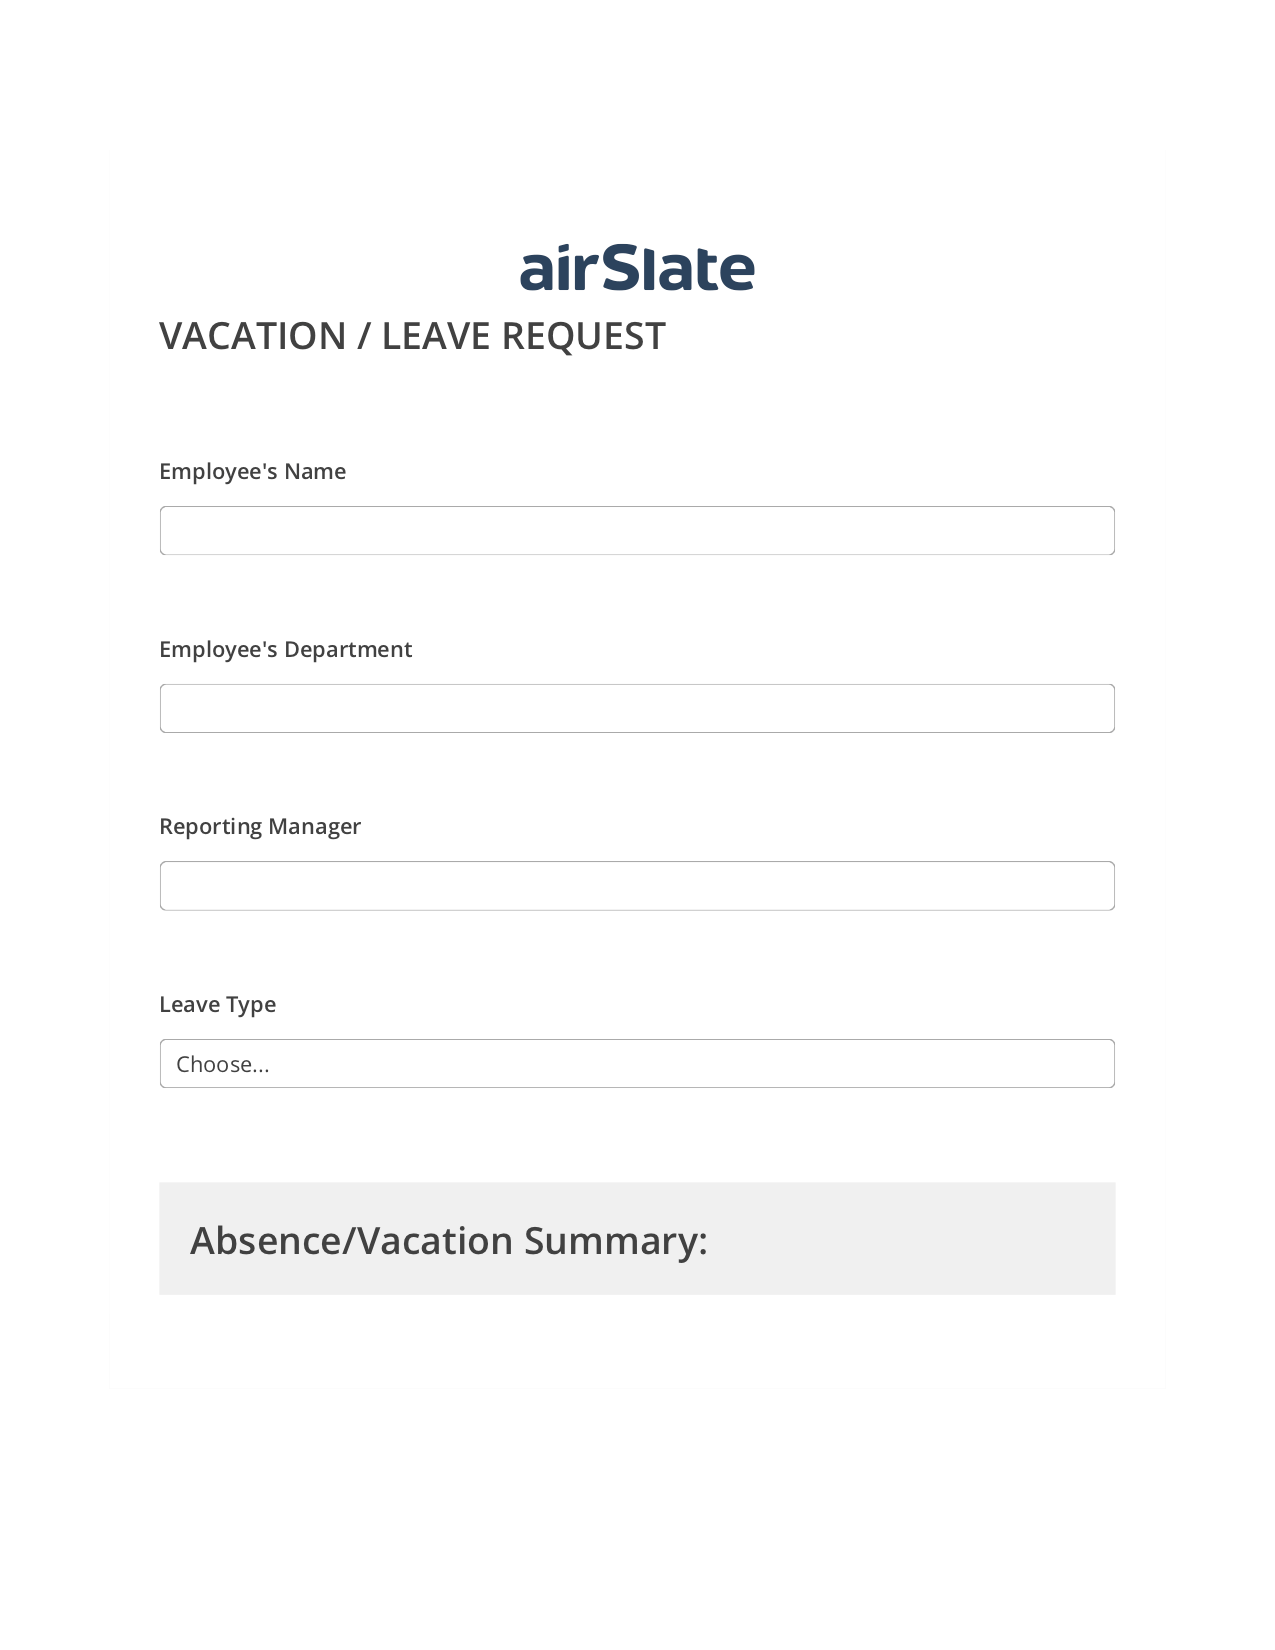 Vacation/Leave Request Flow Jira Bot